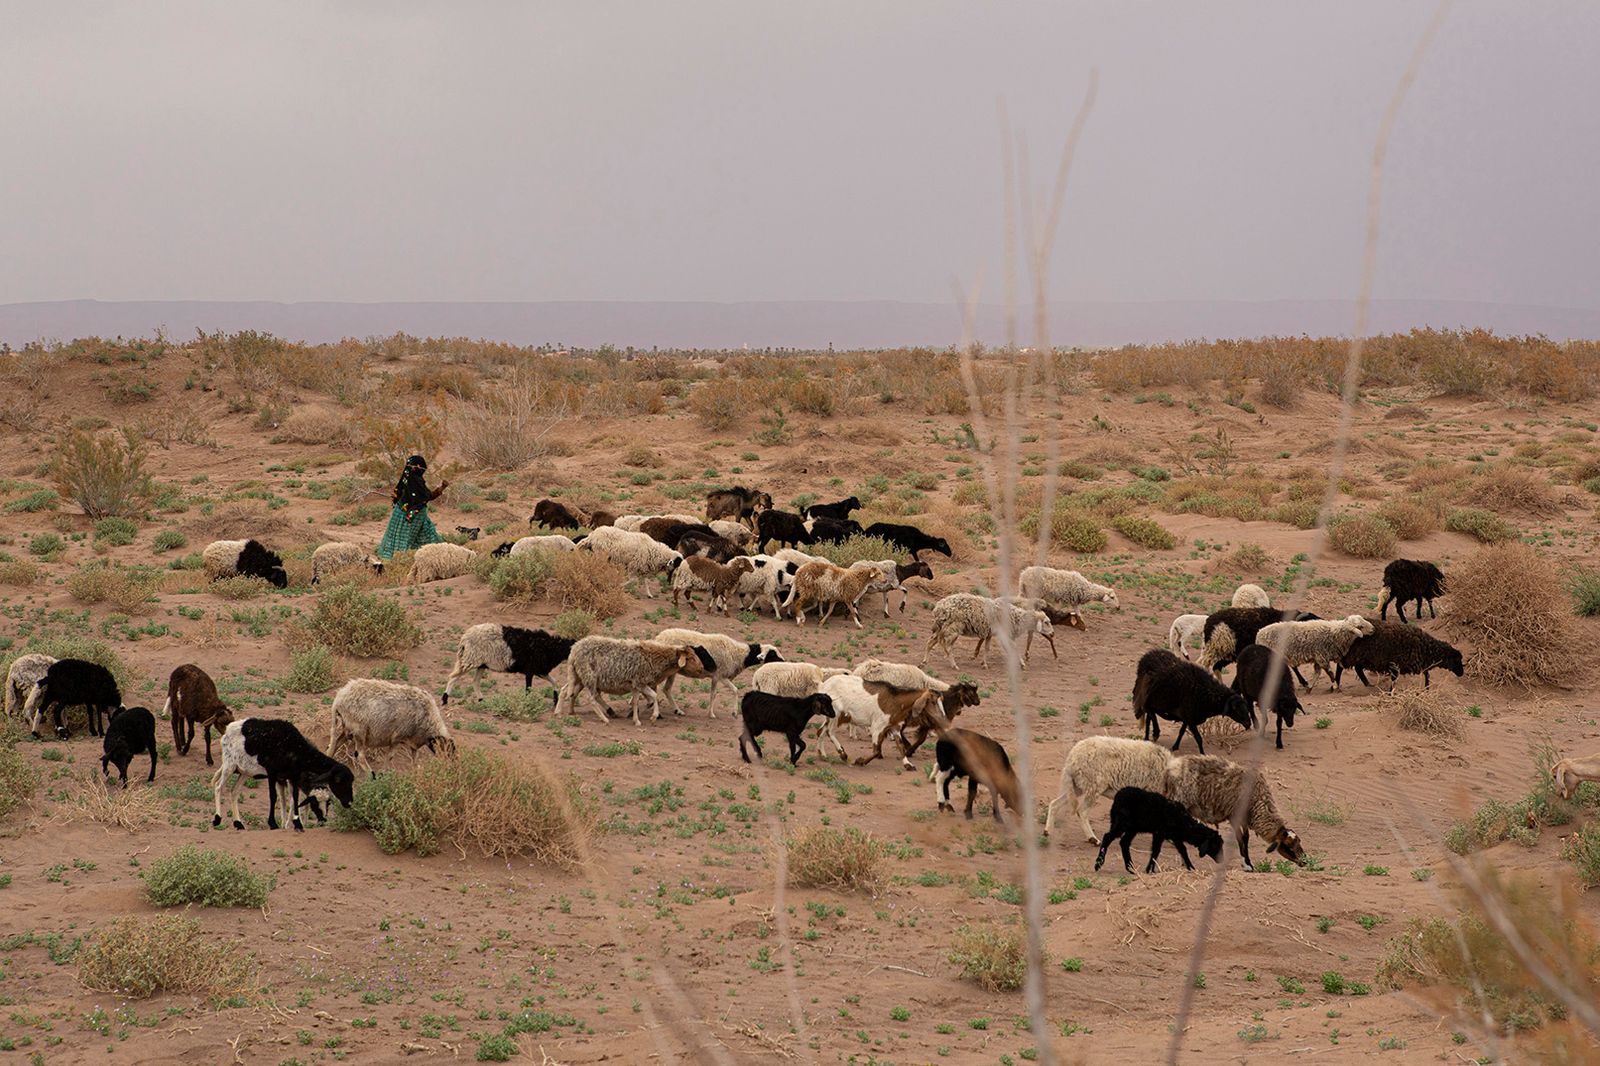 © Matilde Gattoni - Morocco - A herd grazing in the Draa river bed, the river bed has been completely dry for a few years already.